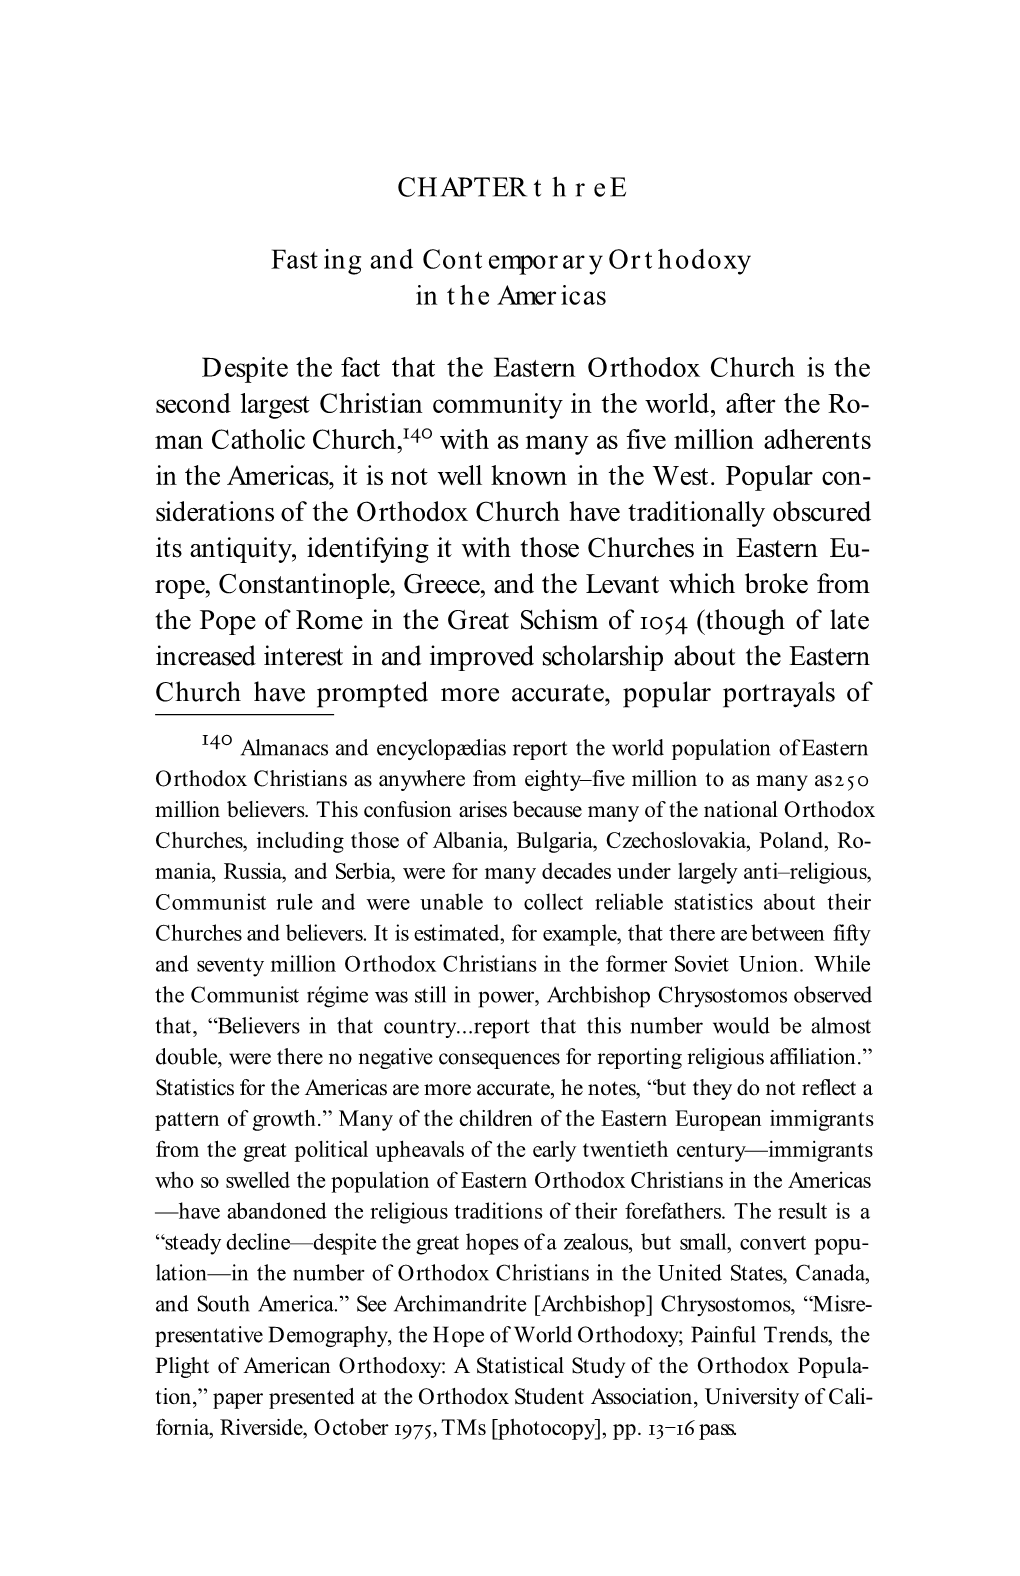 Chapter 3, "Fasting and Contemporary Orthodoxy in the Americas"